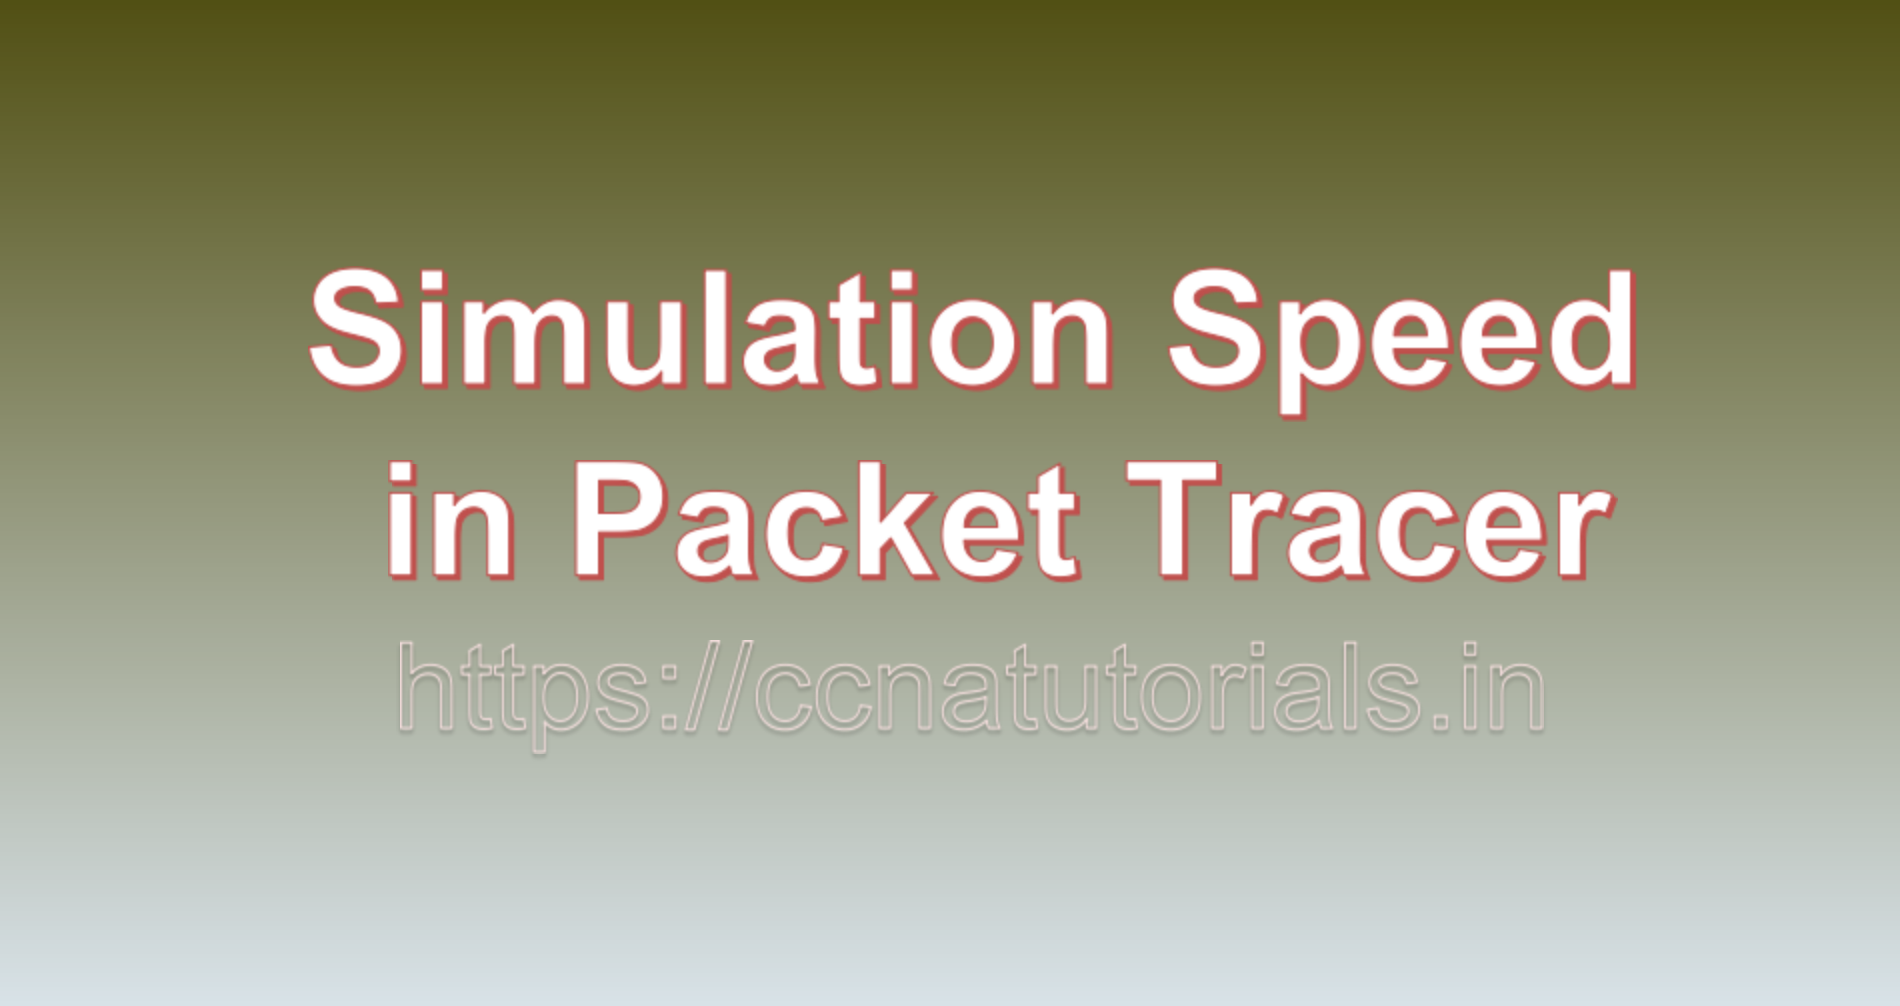 Simulation Speed in Packet Tracer, ccna, ccna tutorials